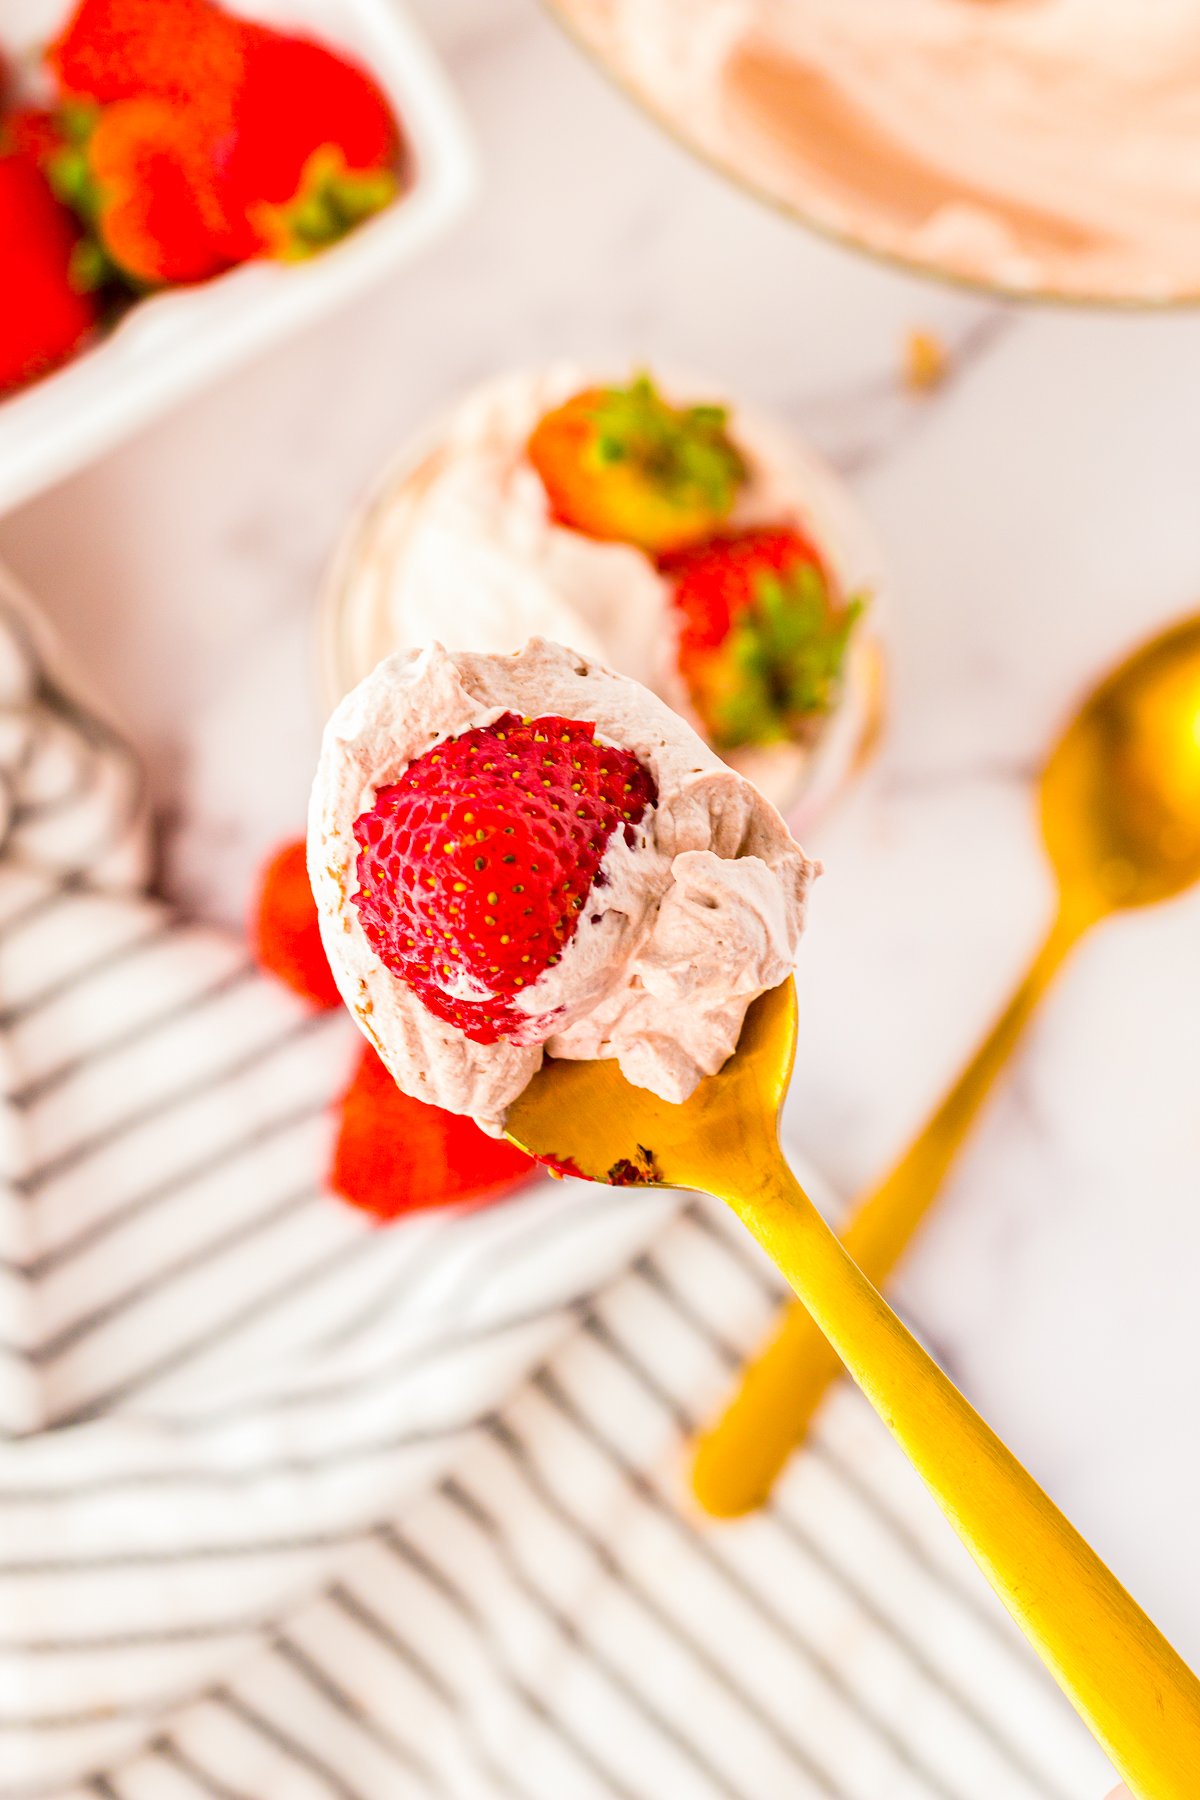 Spoon full of Chocolate Whipped Cream on gold spoon with strawberries.